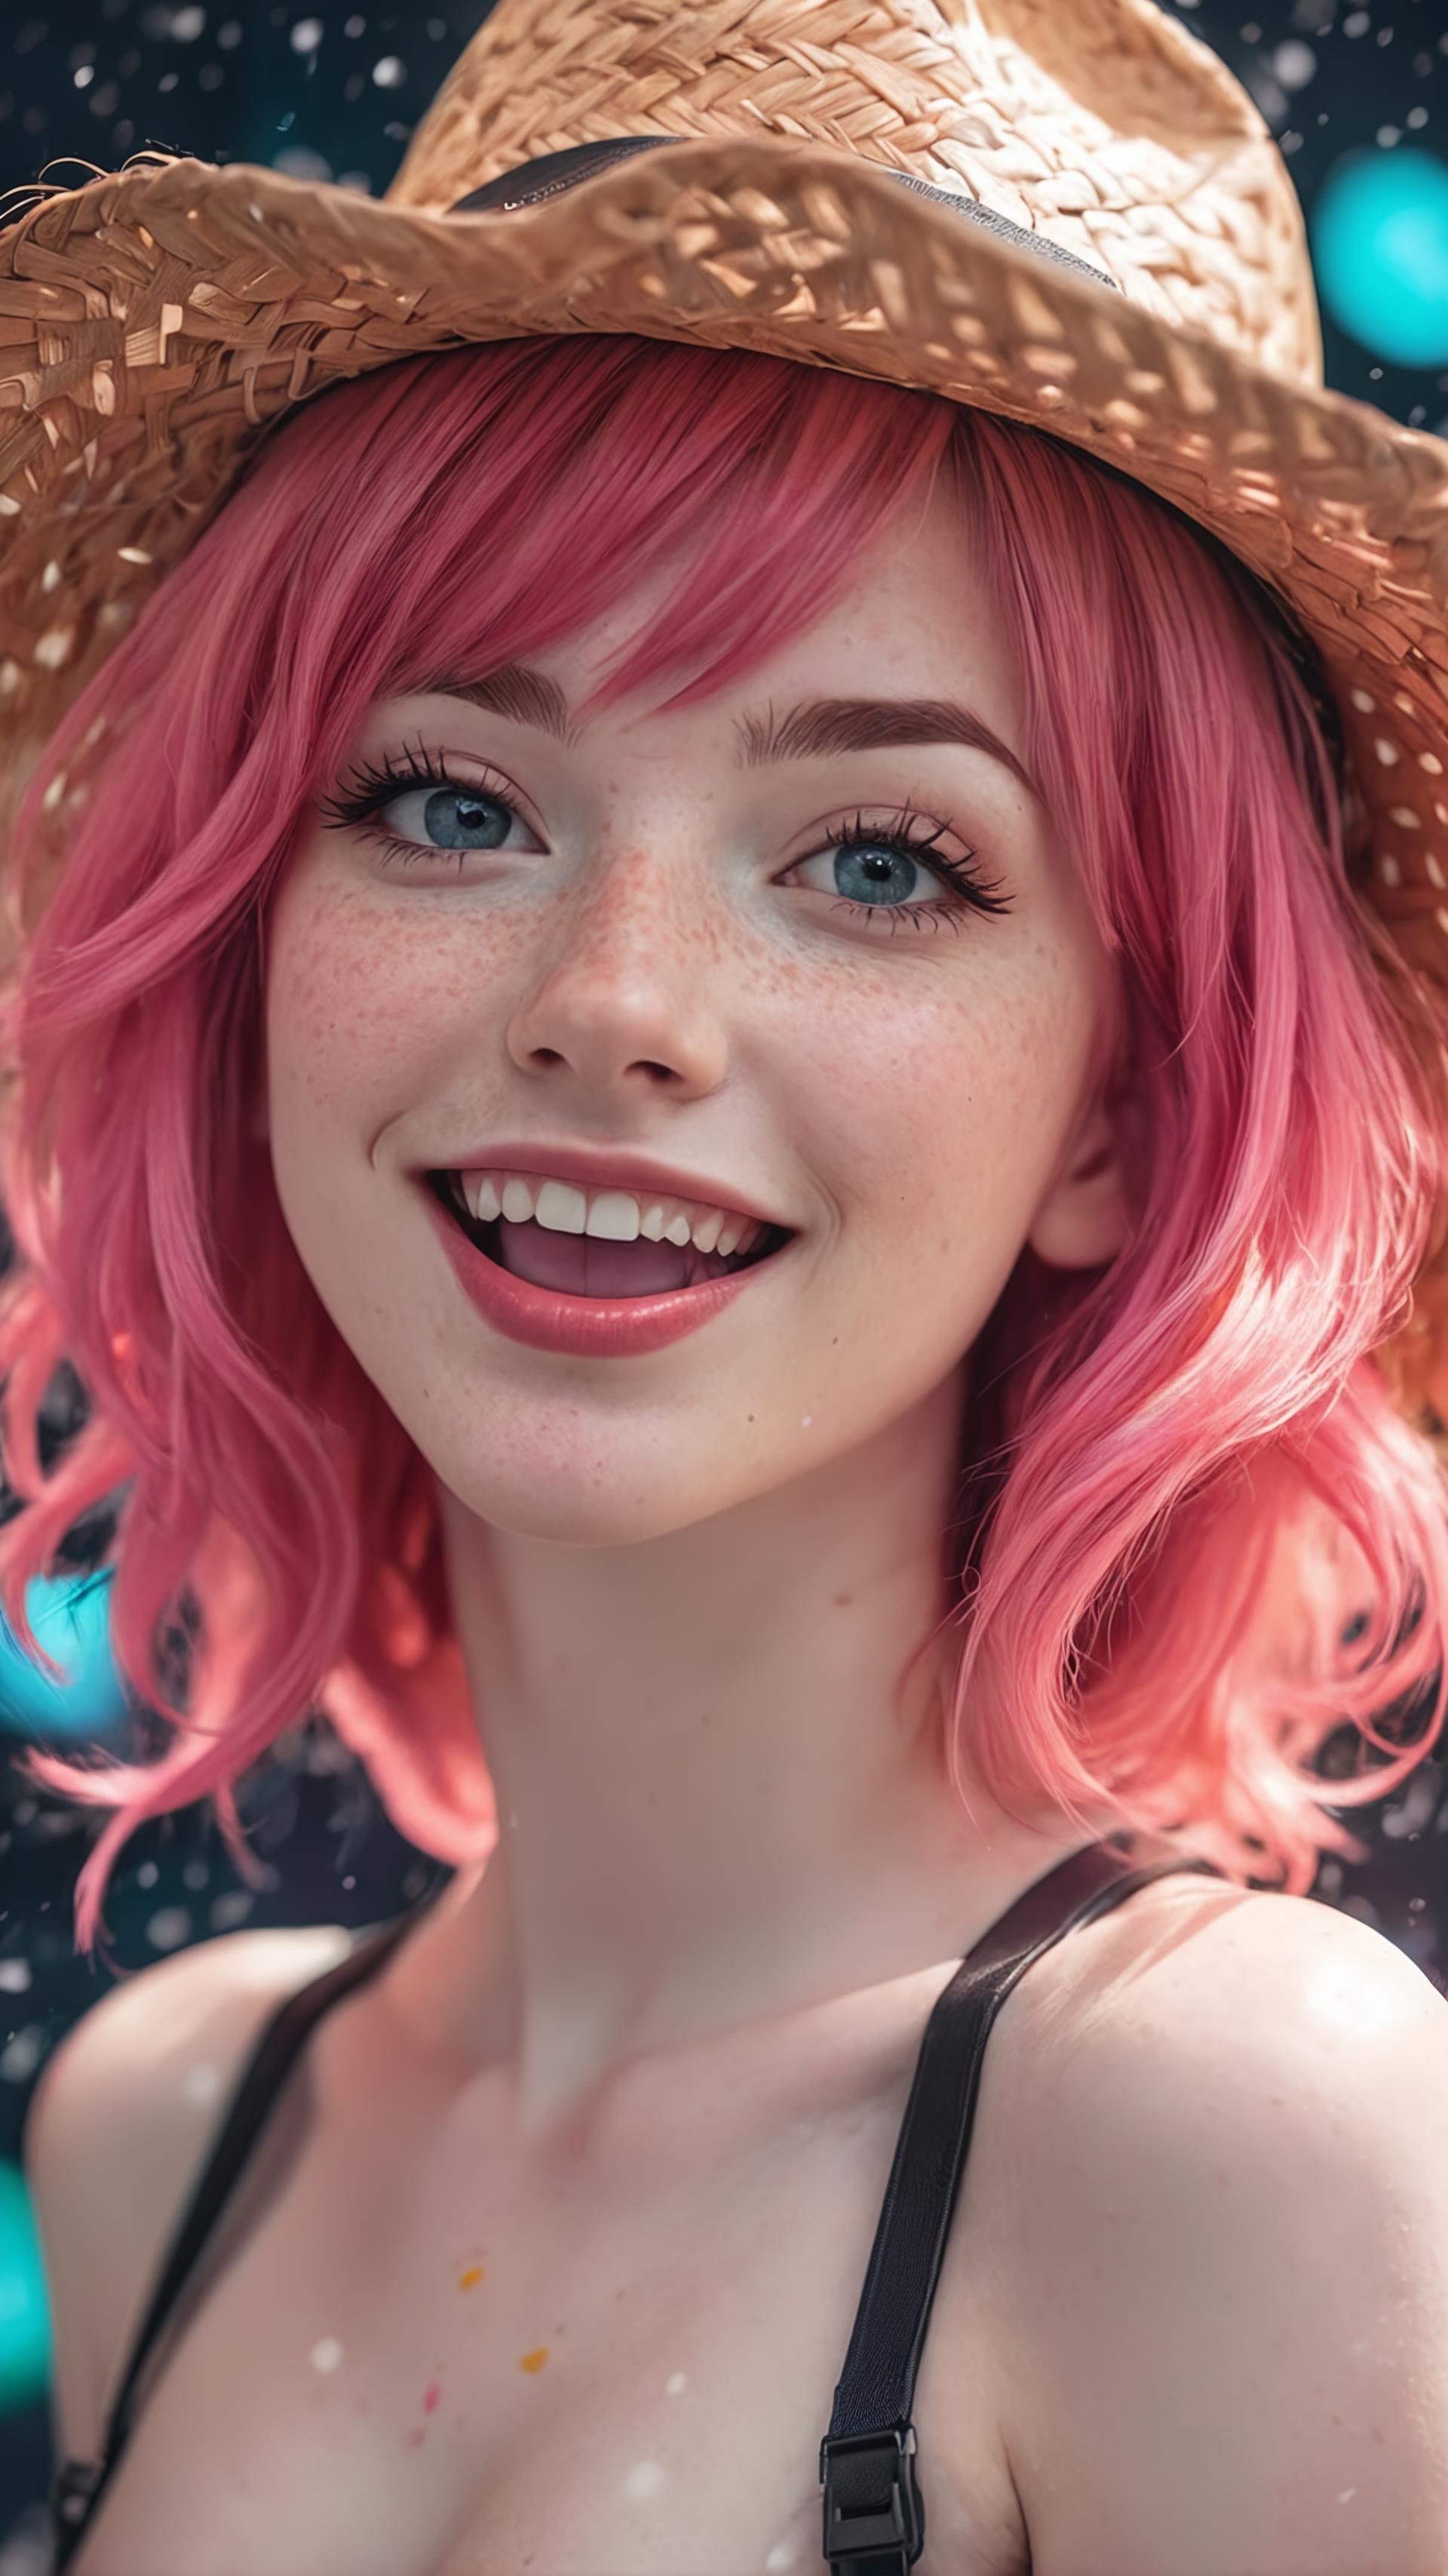 ultra detailed, surreal, strange, (full body sexy gamer girl with pink hair photo), vaporwave neon theme, woman, portrait, smile, laugh, open mouth, (upper body, bust shot, looking away:1.1), neon hair, hair over one eye, ((sexy photo with tongue out)), (black and red lipstick), orange universe background, portrait of a semi naked woman with pale skin and small breasts and freckles, detailed, love look, realistic skin, photograph of a cute girl, (wearing straw hat, redhaired), pale skin, freckles, blush, (topless:1.1), snowfall, Porta 160 color, shot on ARRI ALEXA 65, sharp focus on subject, shot by Don McCullin, gamer girl photo